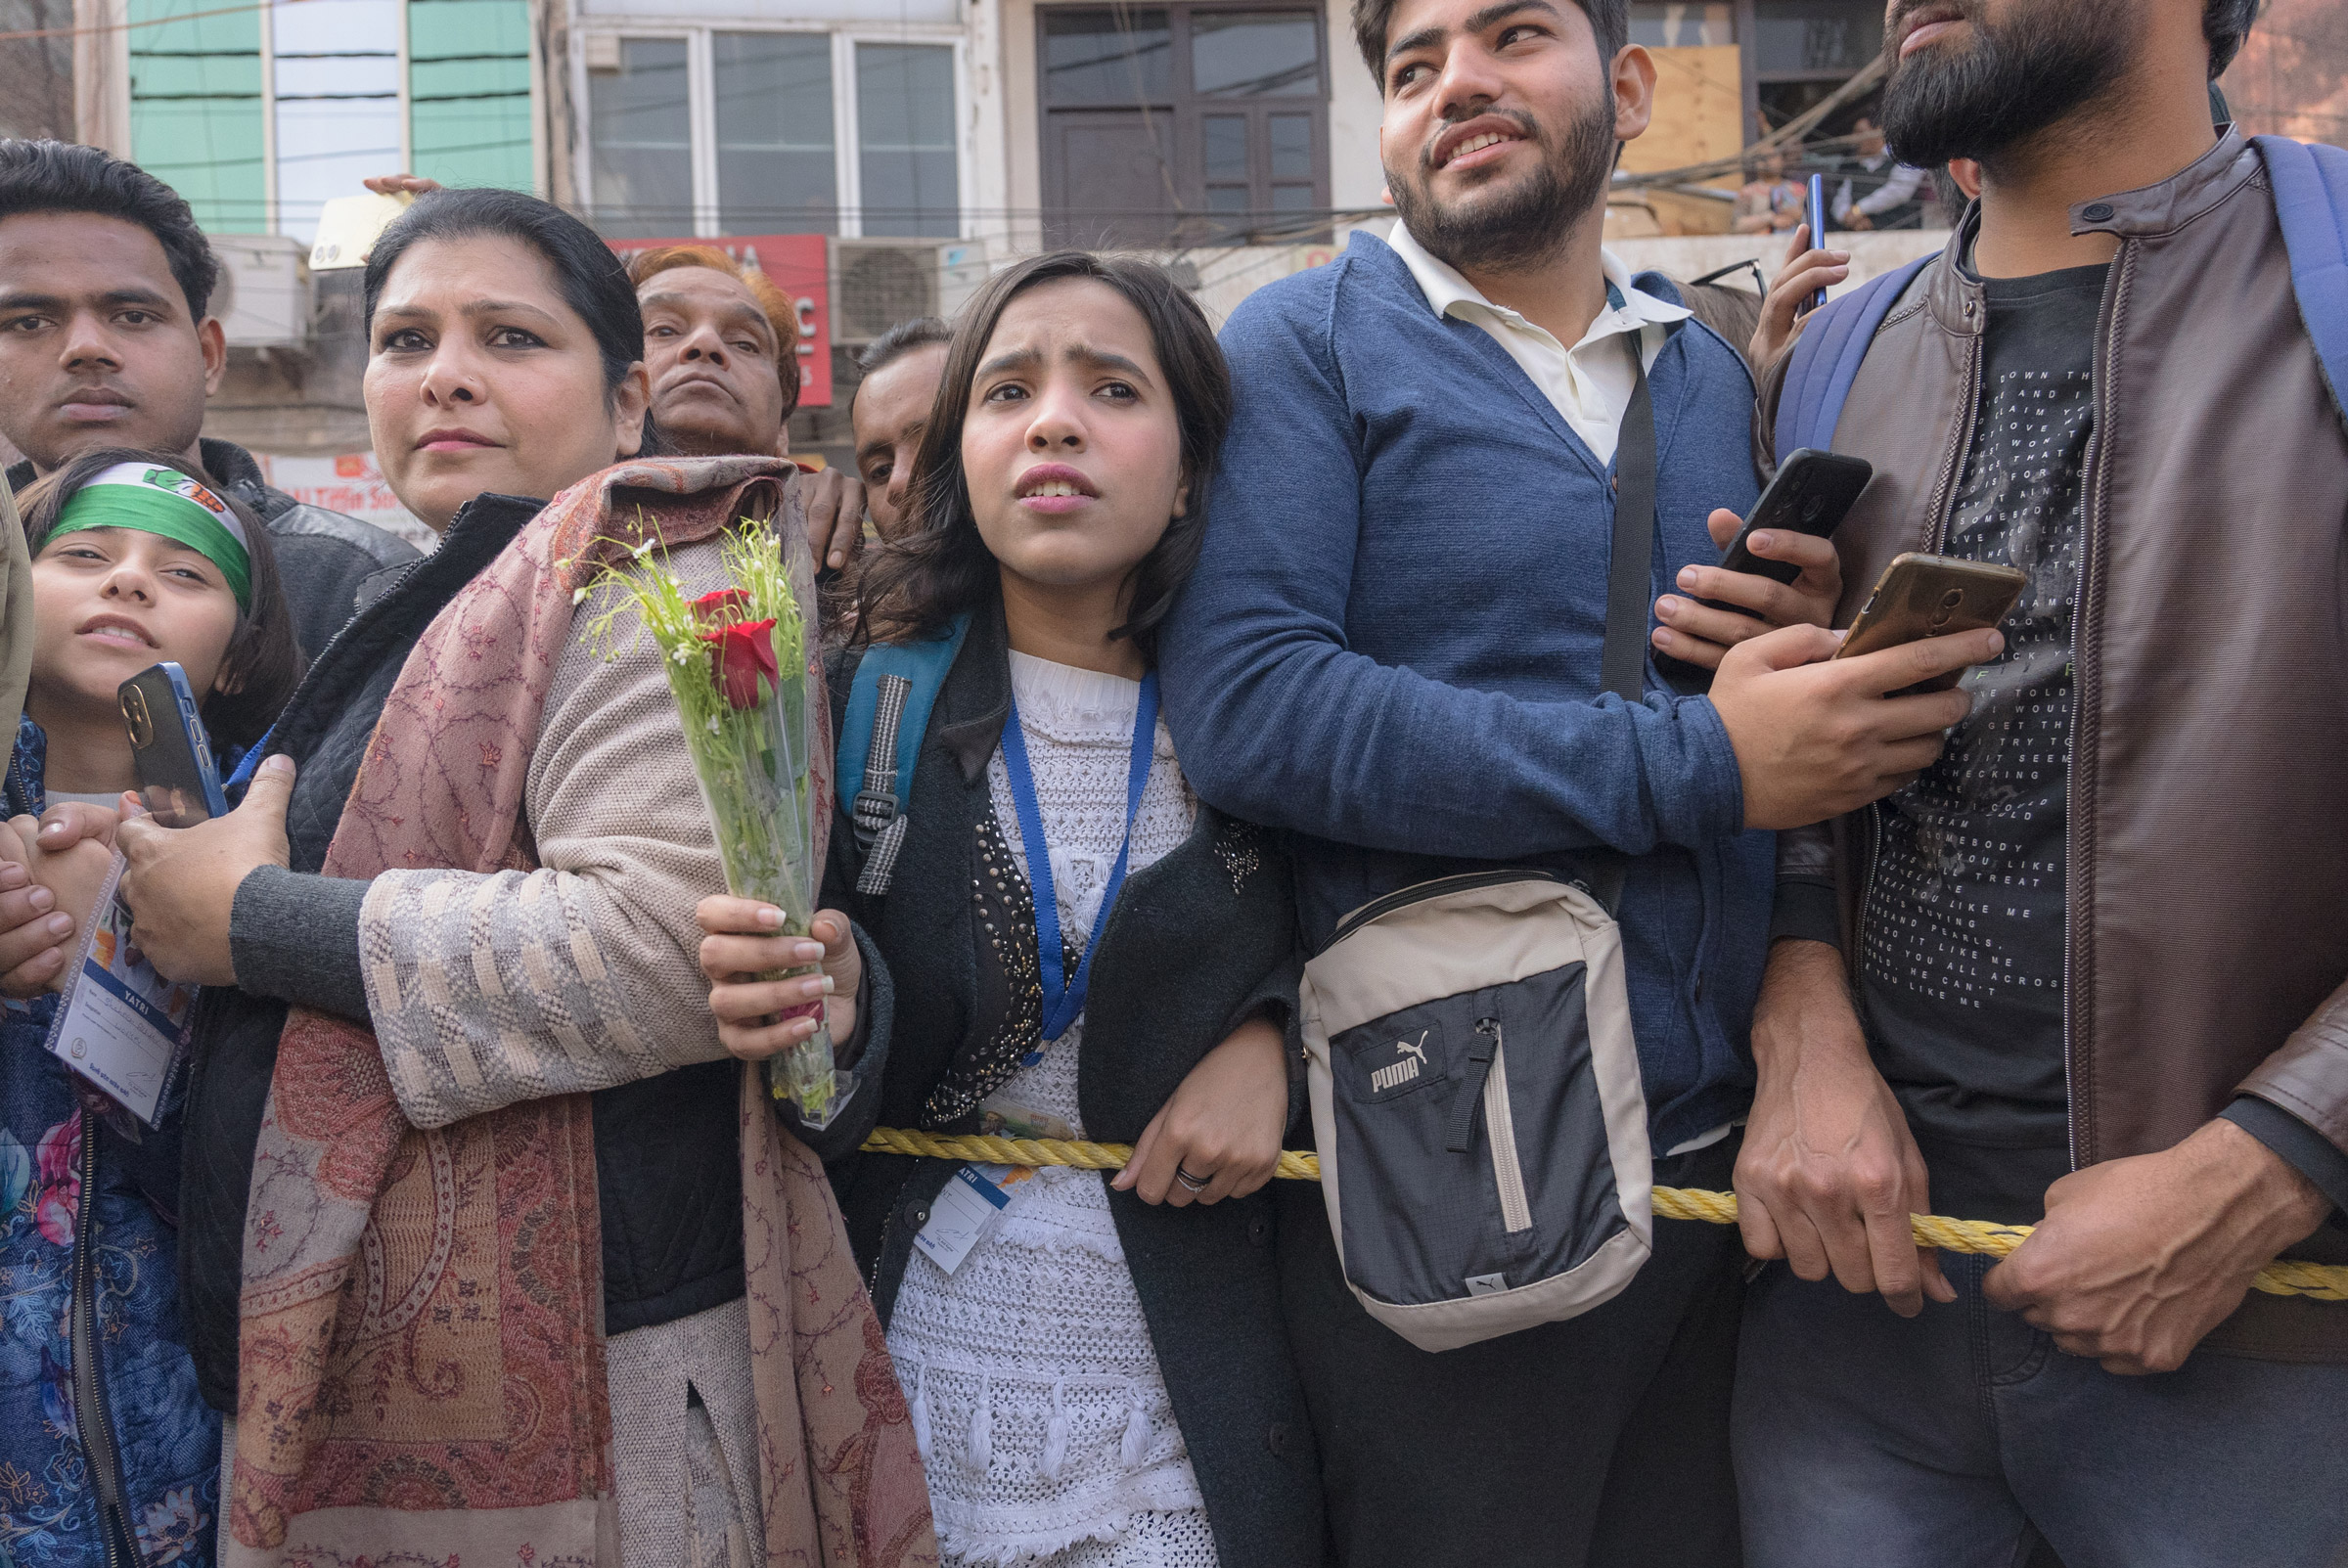 A girl tries to break from the crowd to present a bouquet of flowers to Rahul Gandhi in New Delhi, India